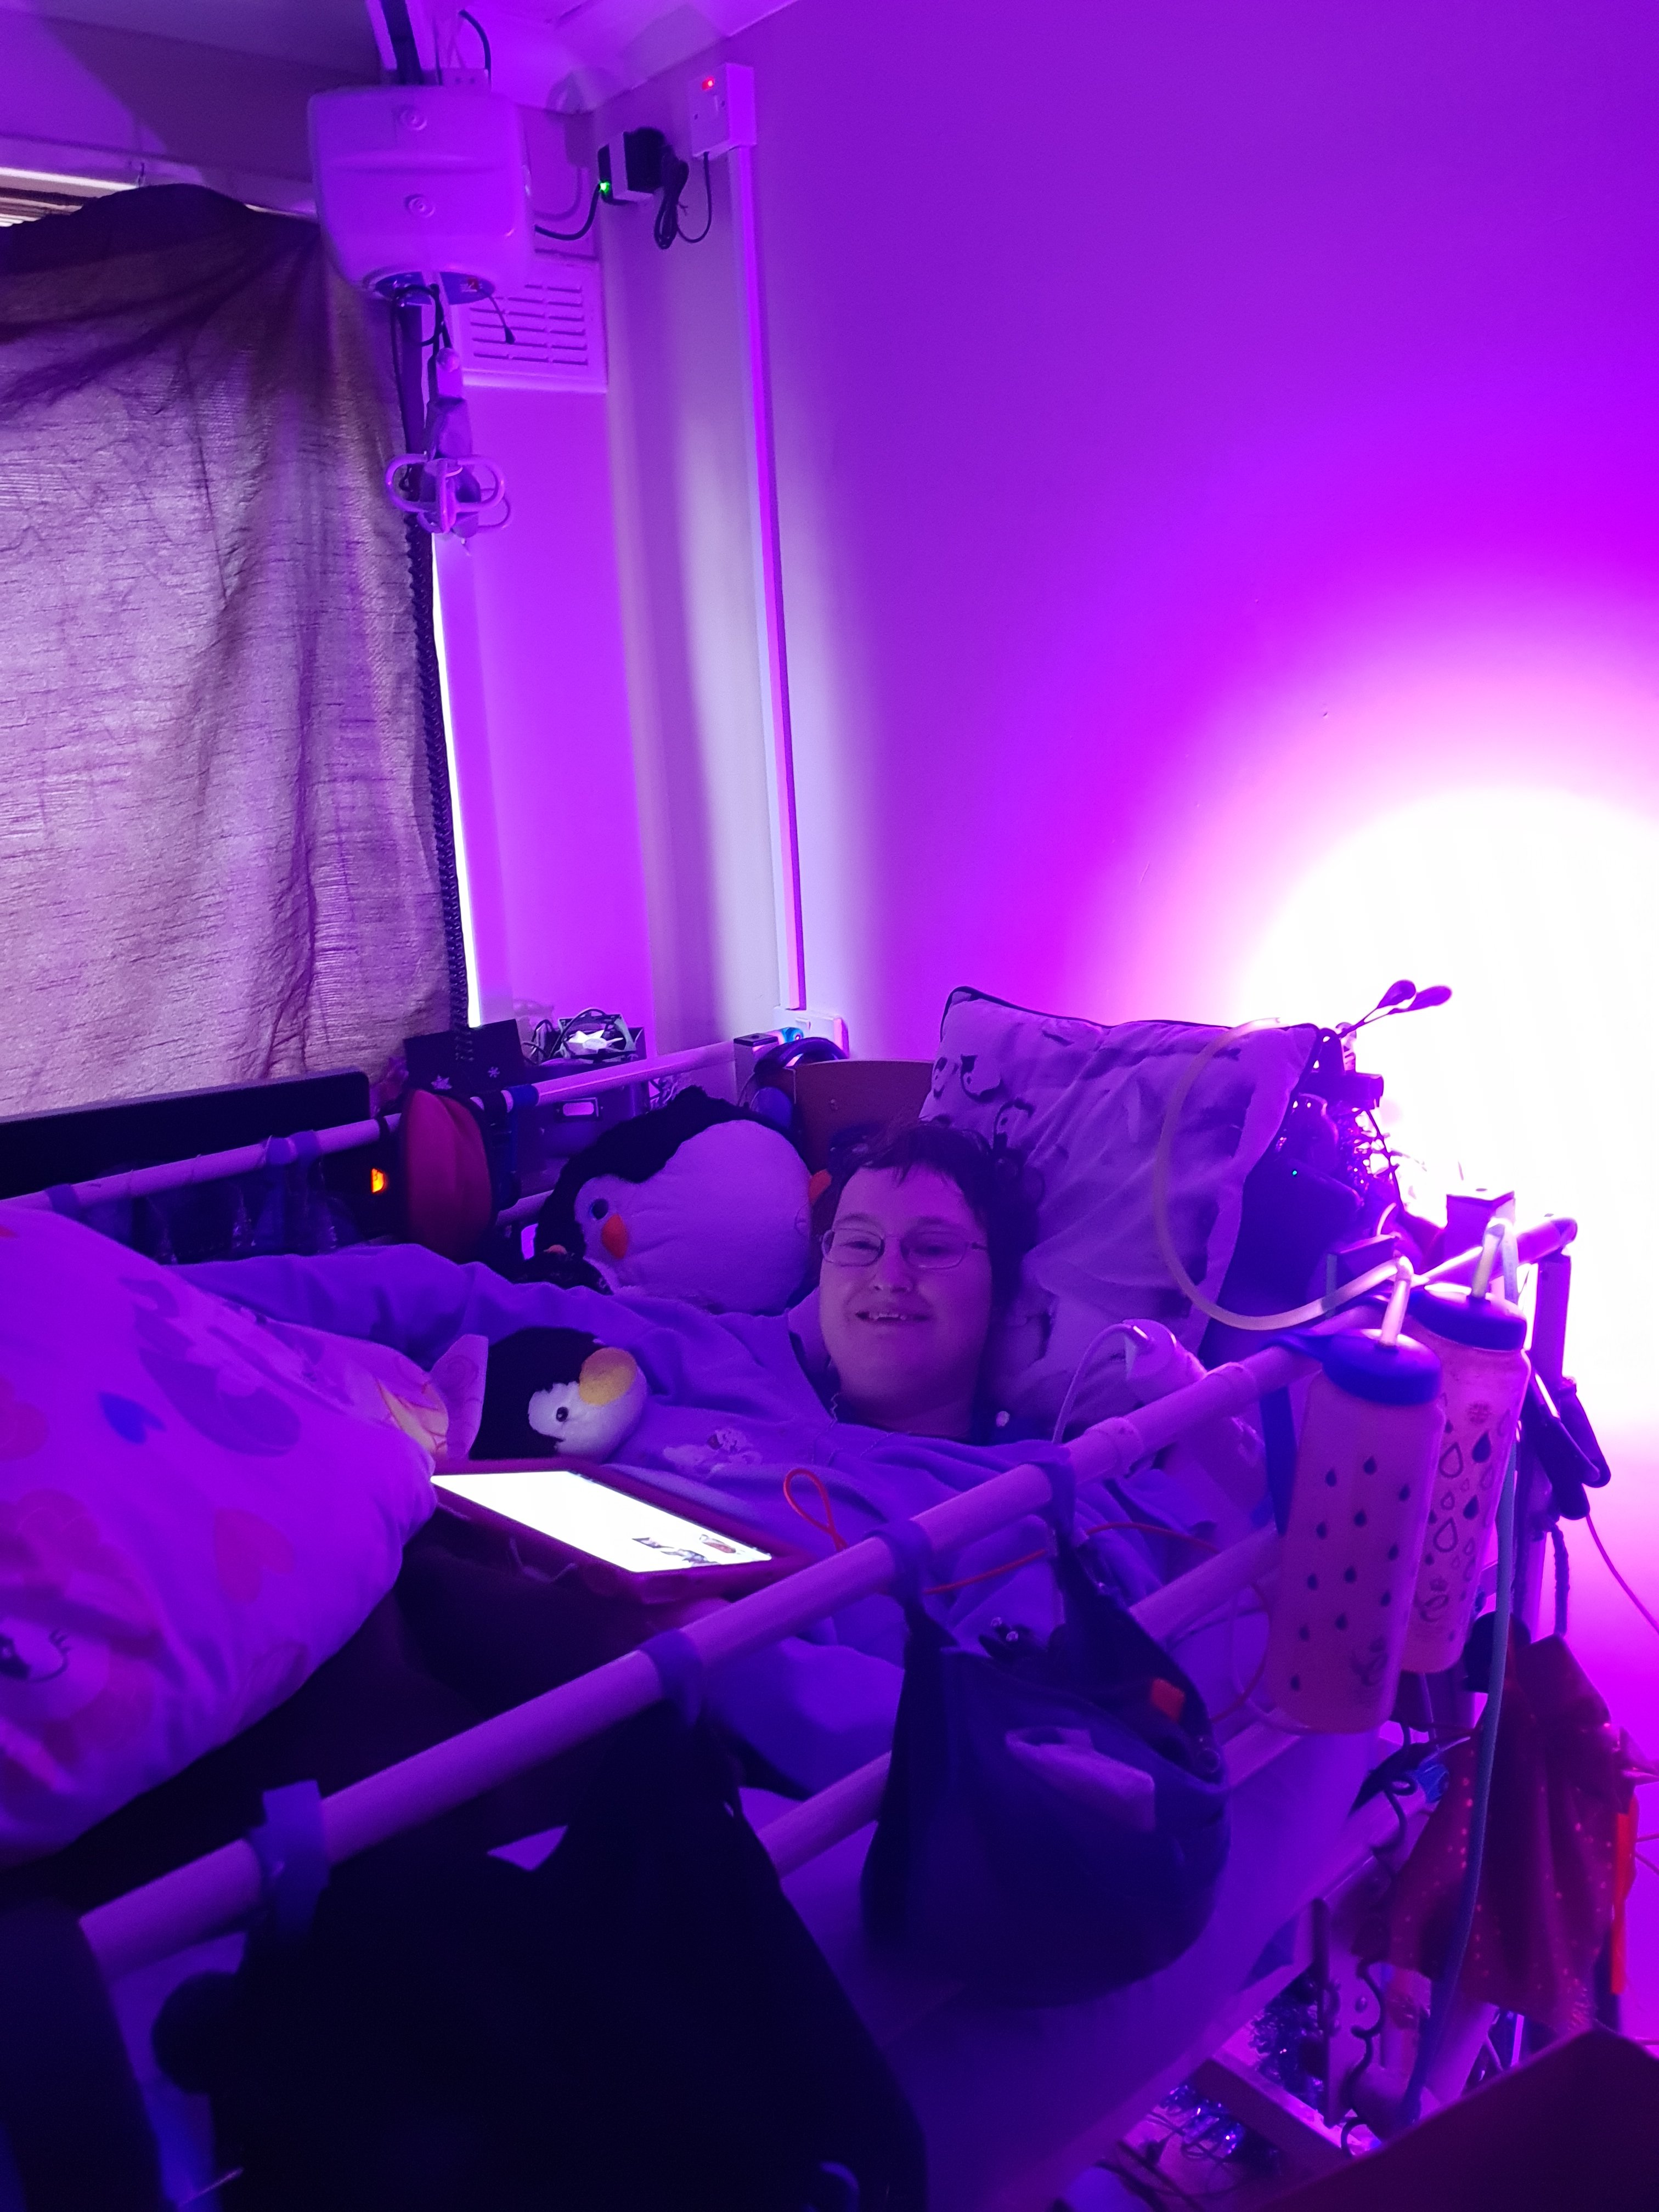 Danni is lying in bed in their back. They are smiling. The image is tinted purple from a light behind the bed. 